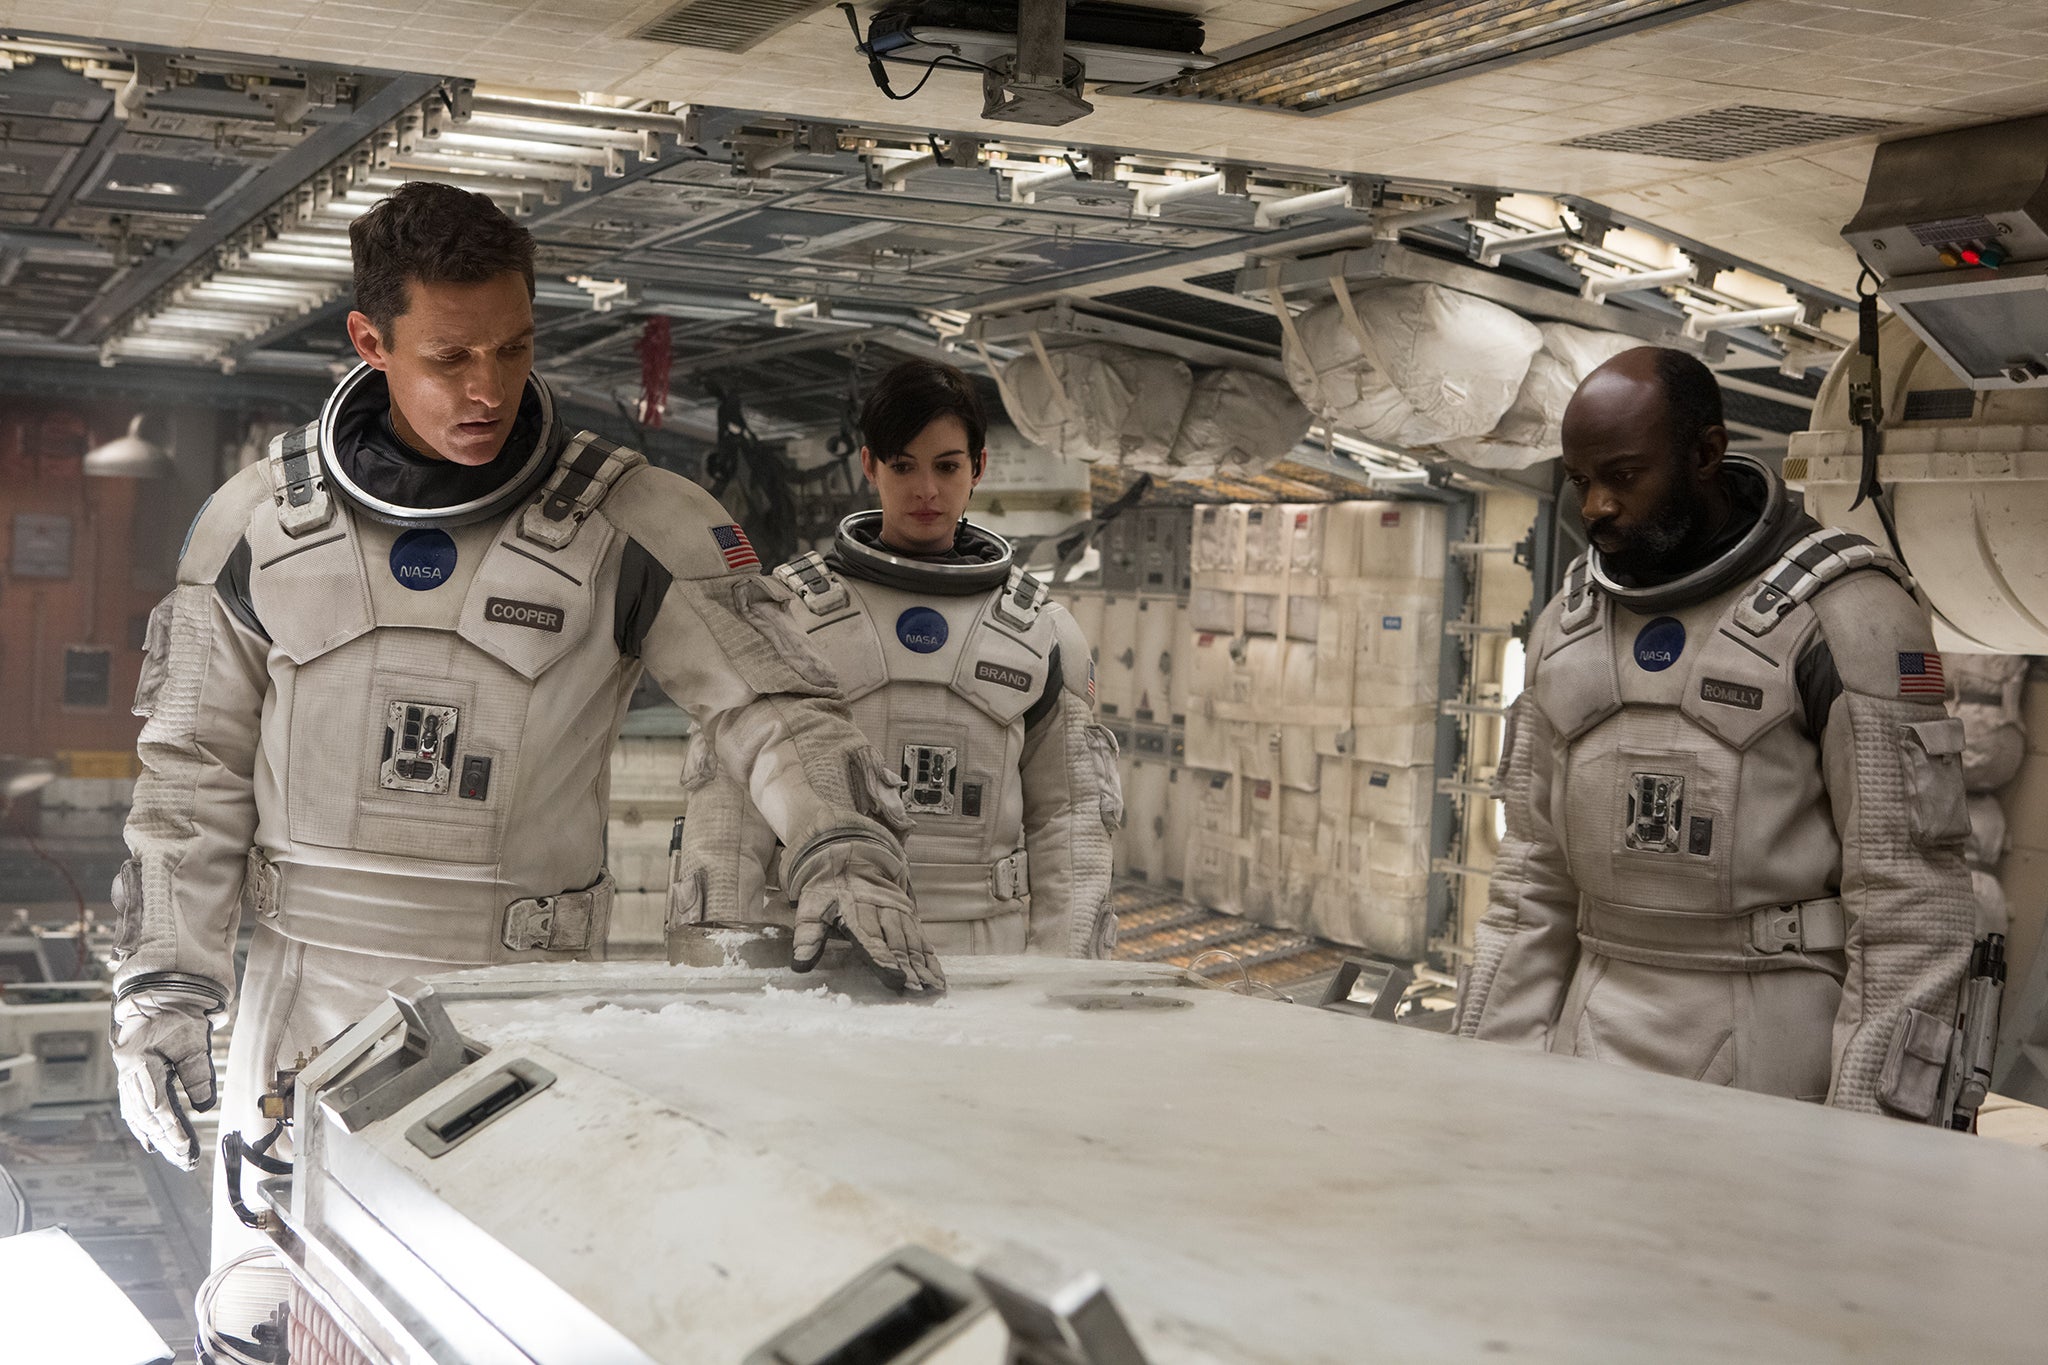 Matthew McConaughey and Anne Hathaway will be discussing new film Interstellar on the Graham Norton Show